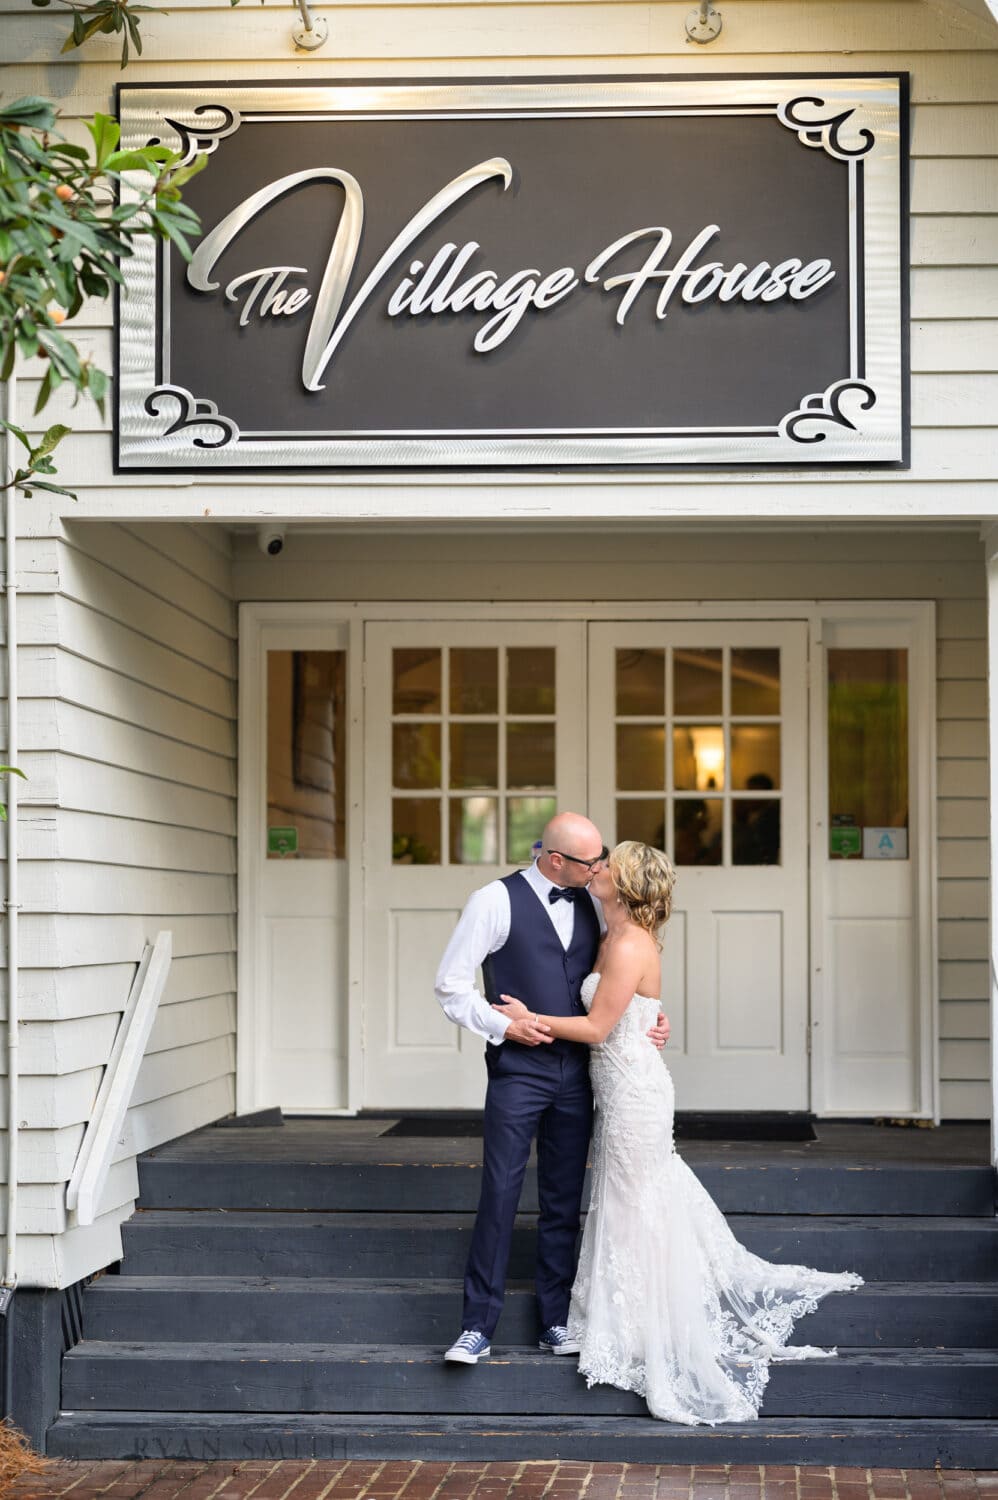 Picture in front of the Village House sign - The Village House at Litchfield